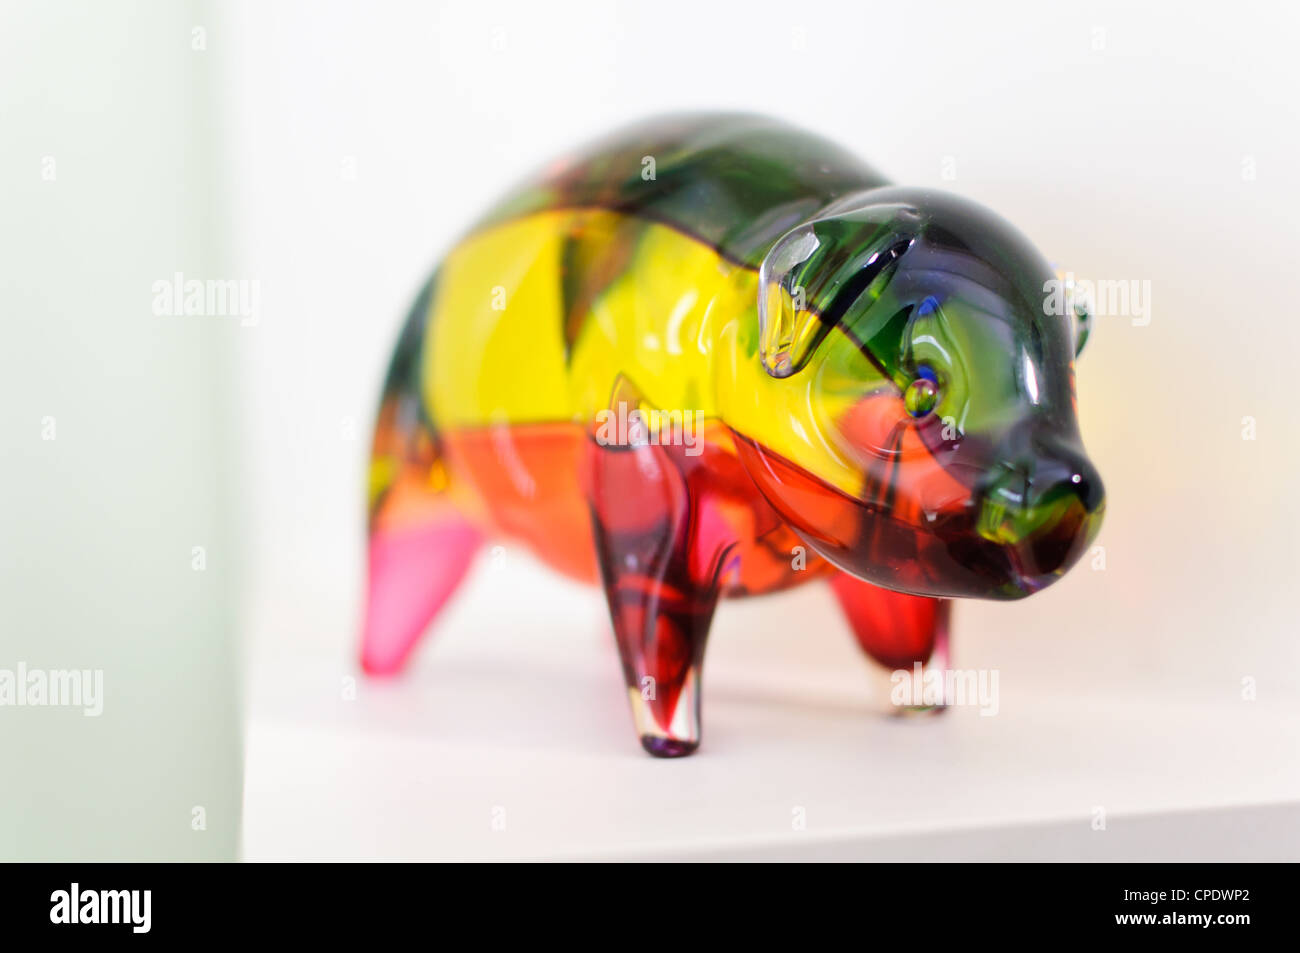 Pig shaped multicolored glass ornament Stock Photo